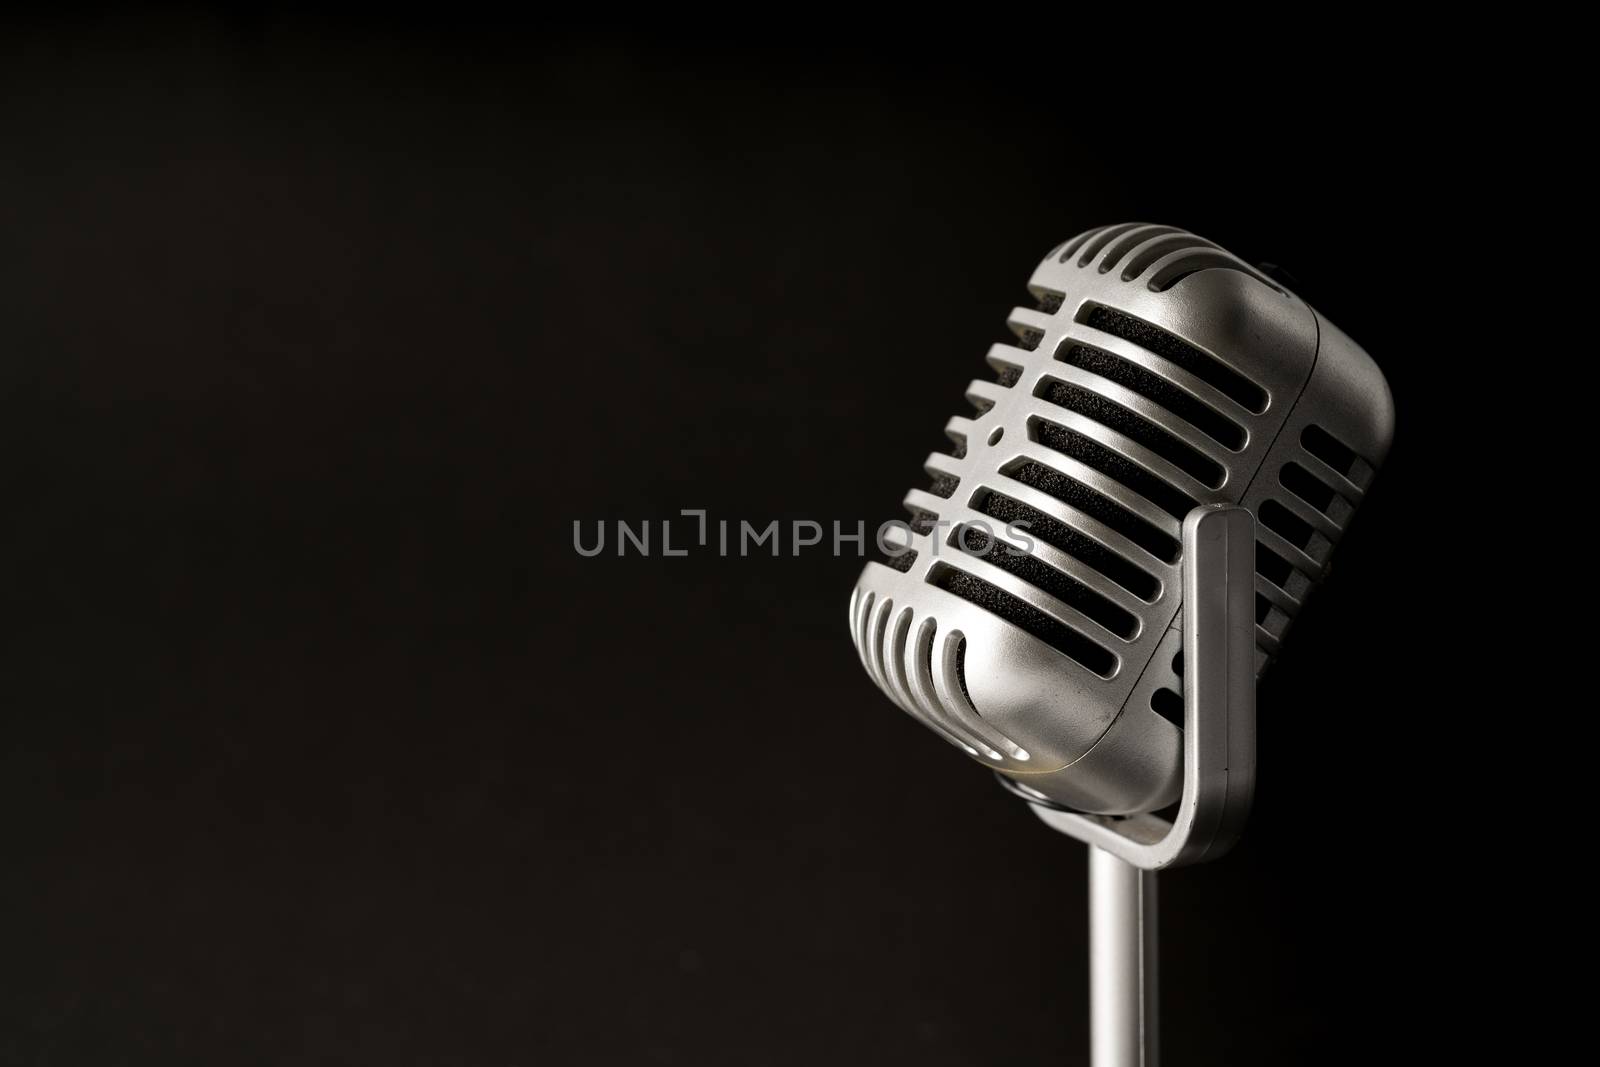 Retro style microphone in party or concert by Alicephoto